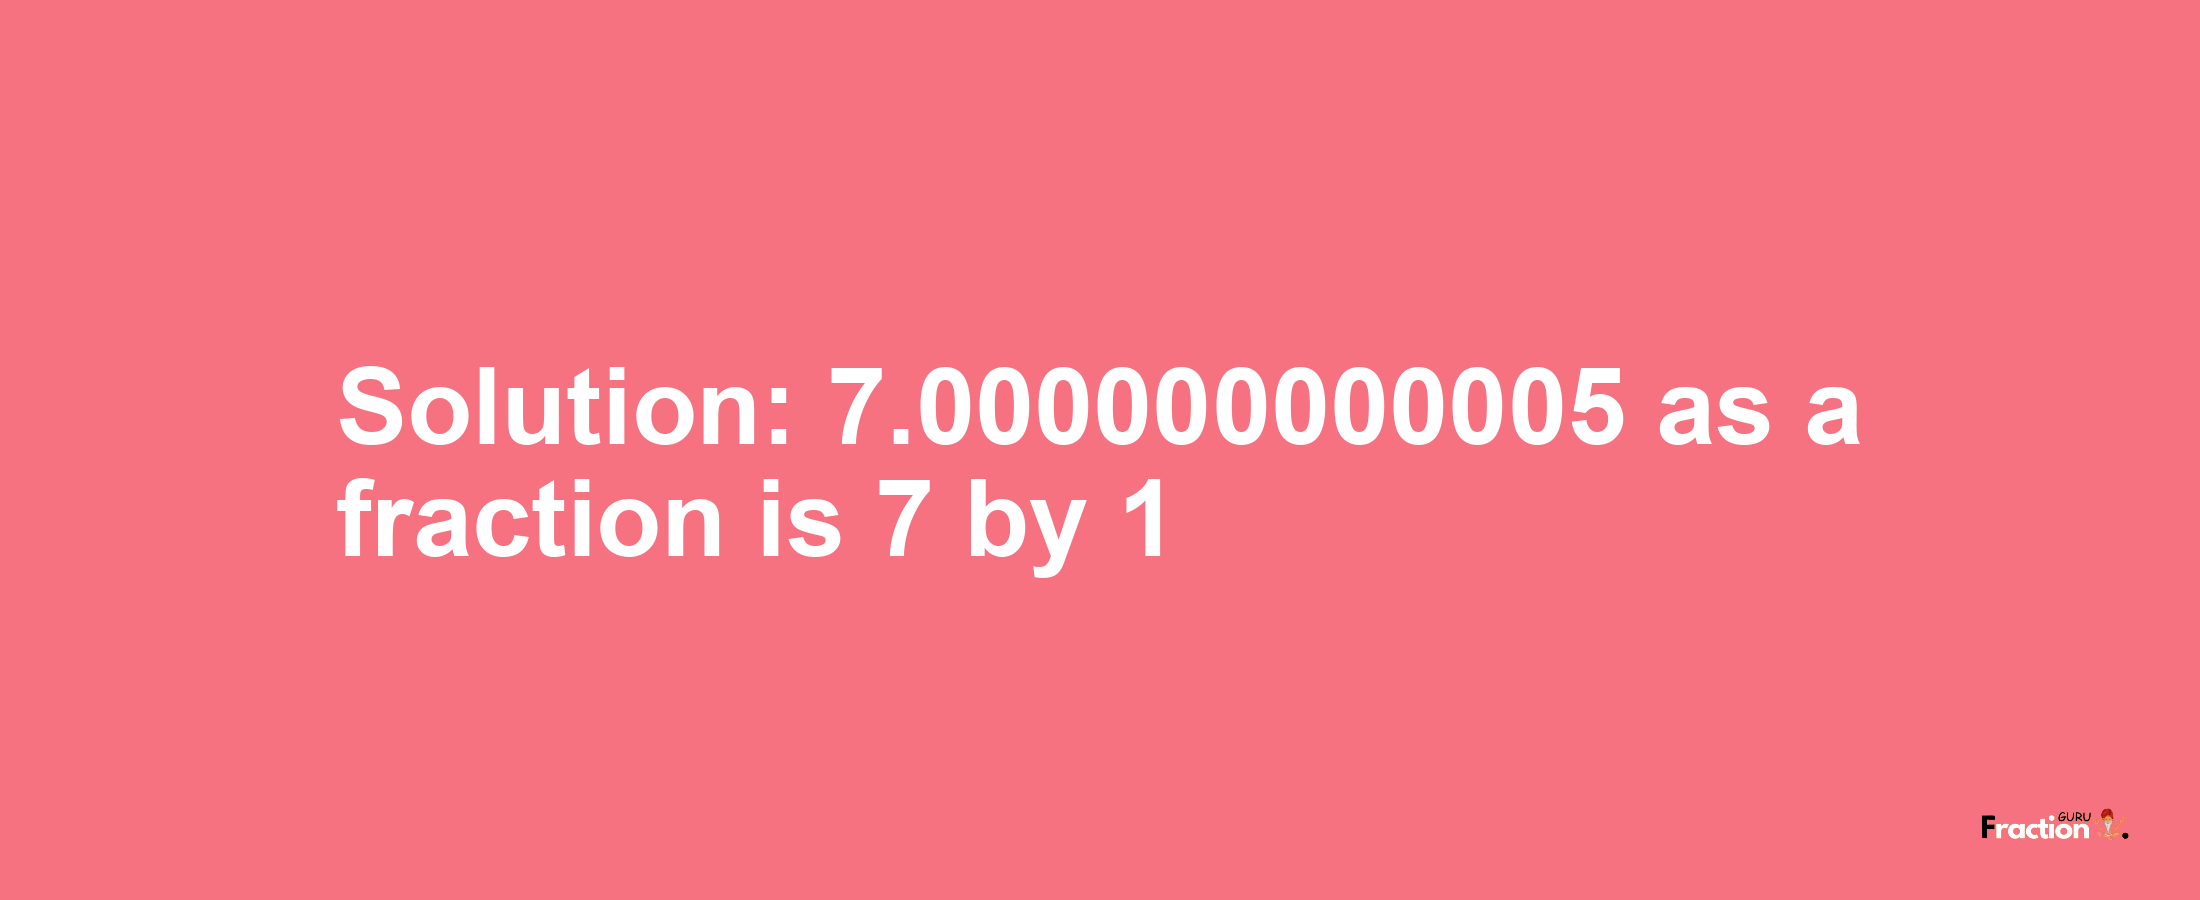 Solution:7.000000000005 as a fraction is 7/1